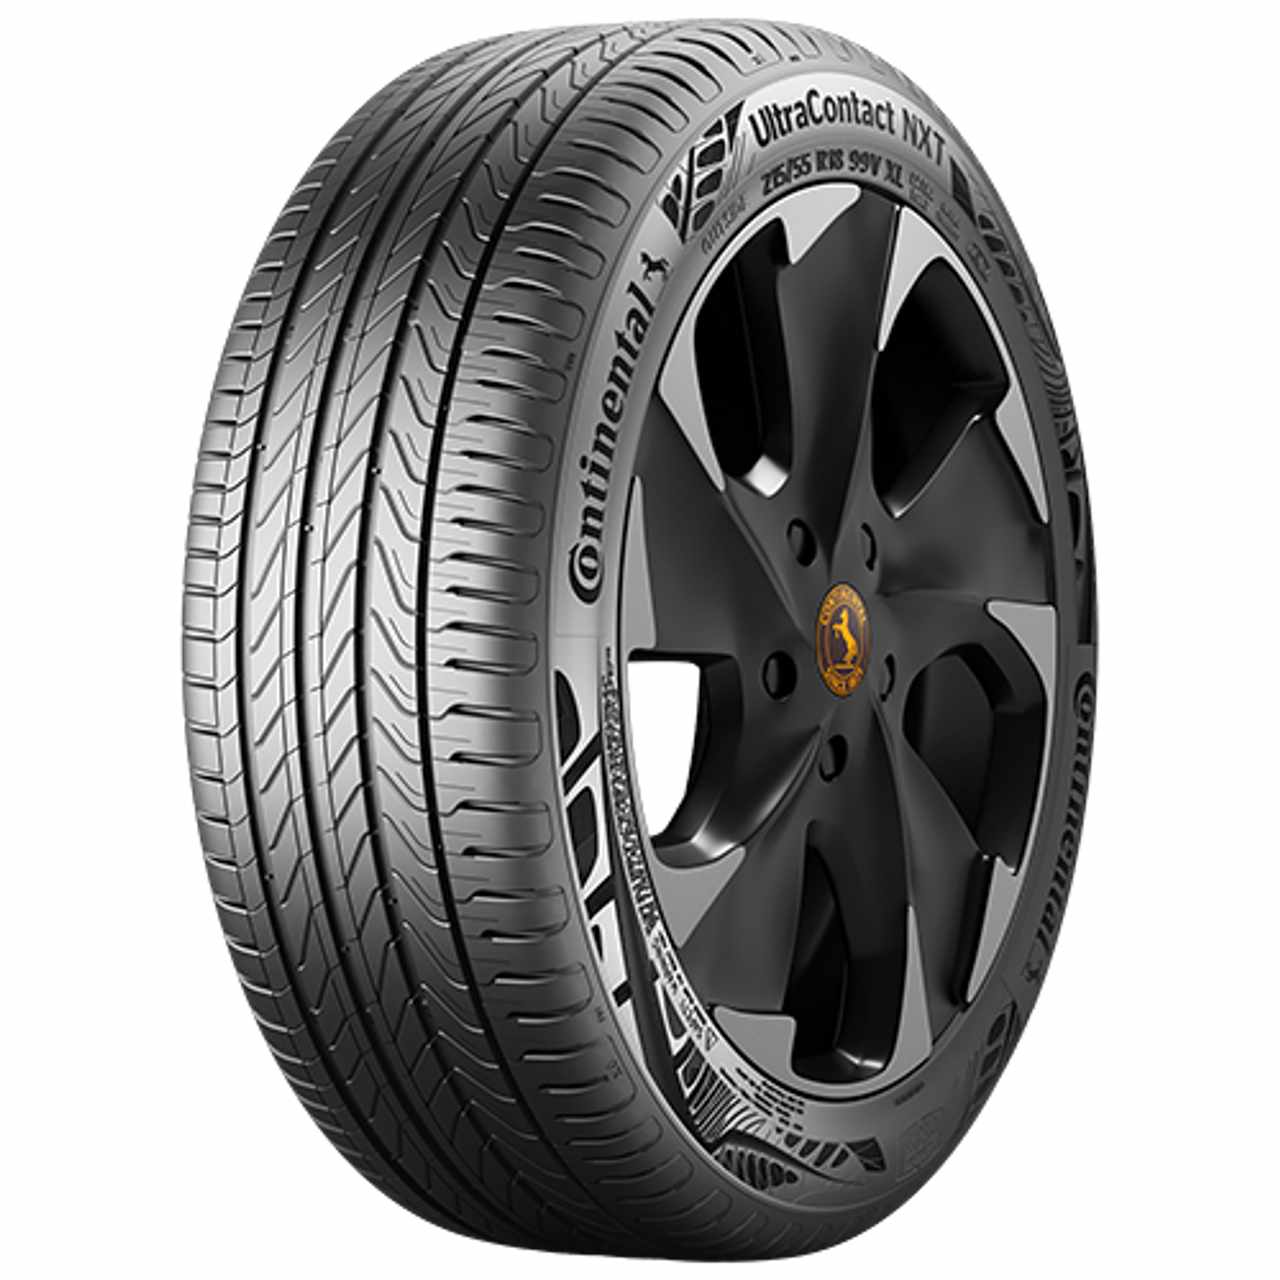 CONTINENTAL ULTRACONTACT NXT (EVc) 215/55R17 98W FR BSW XL